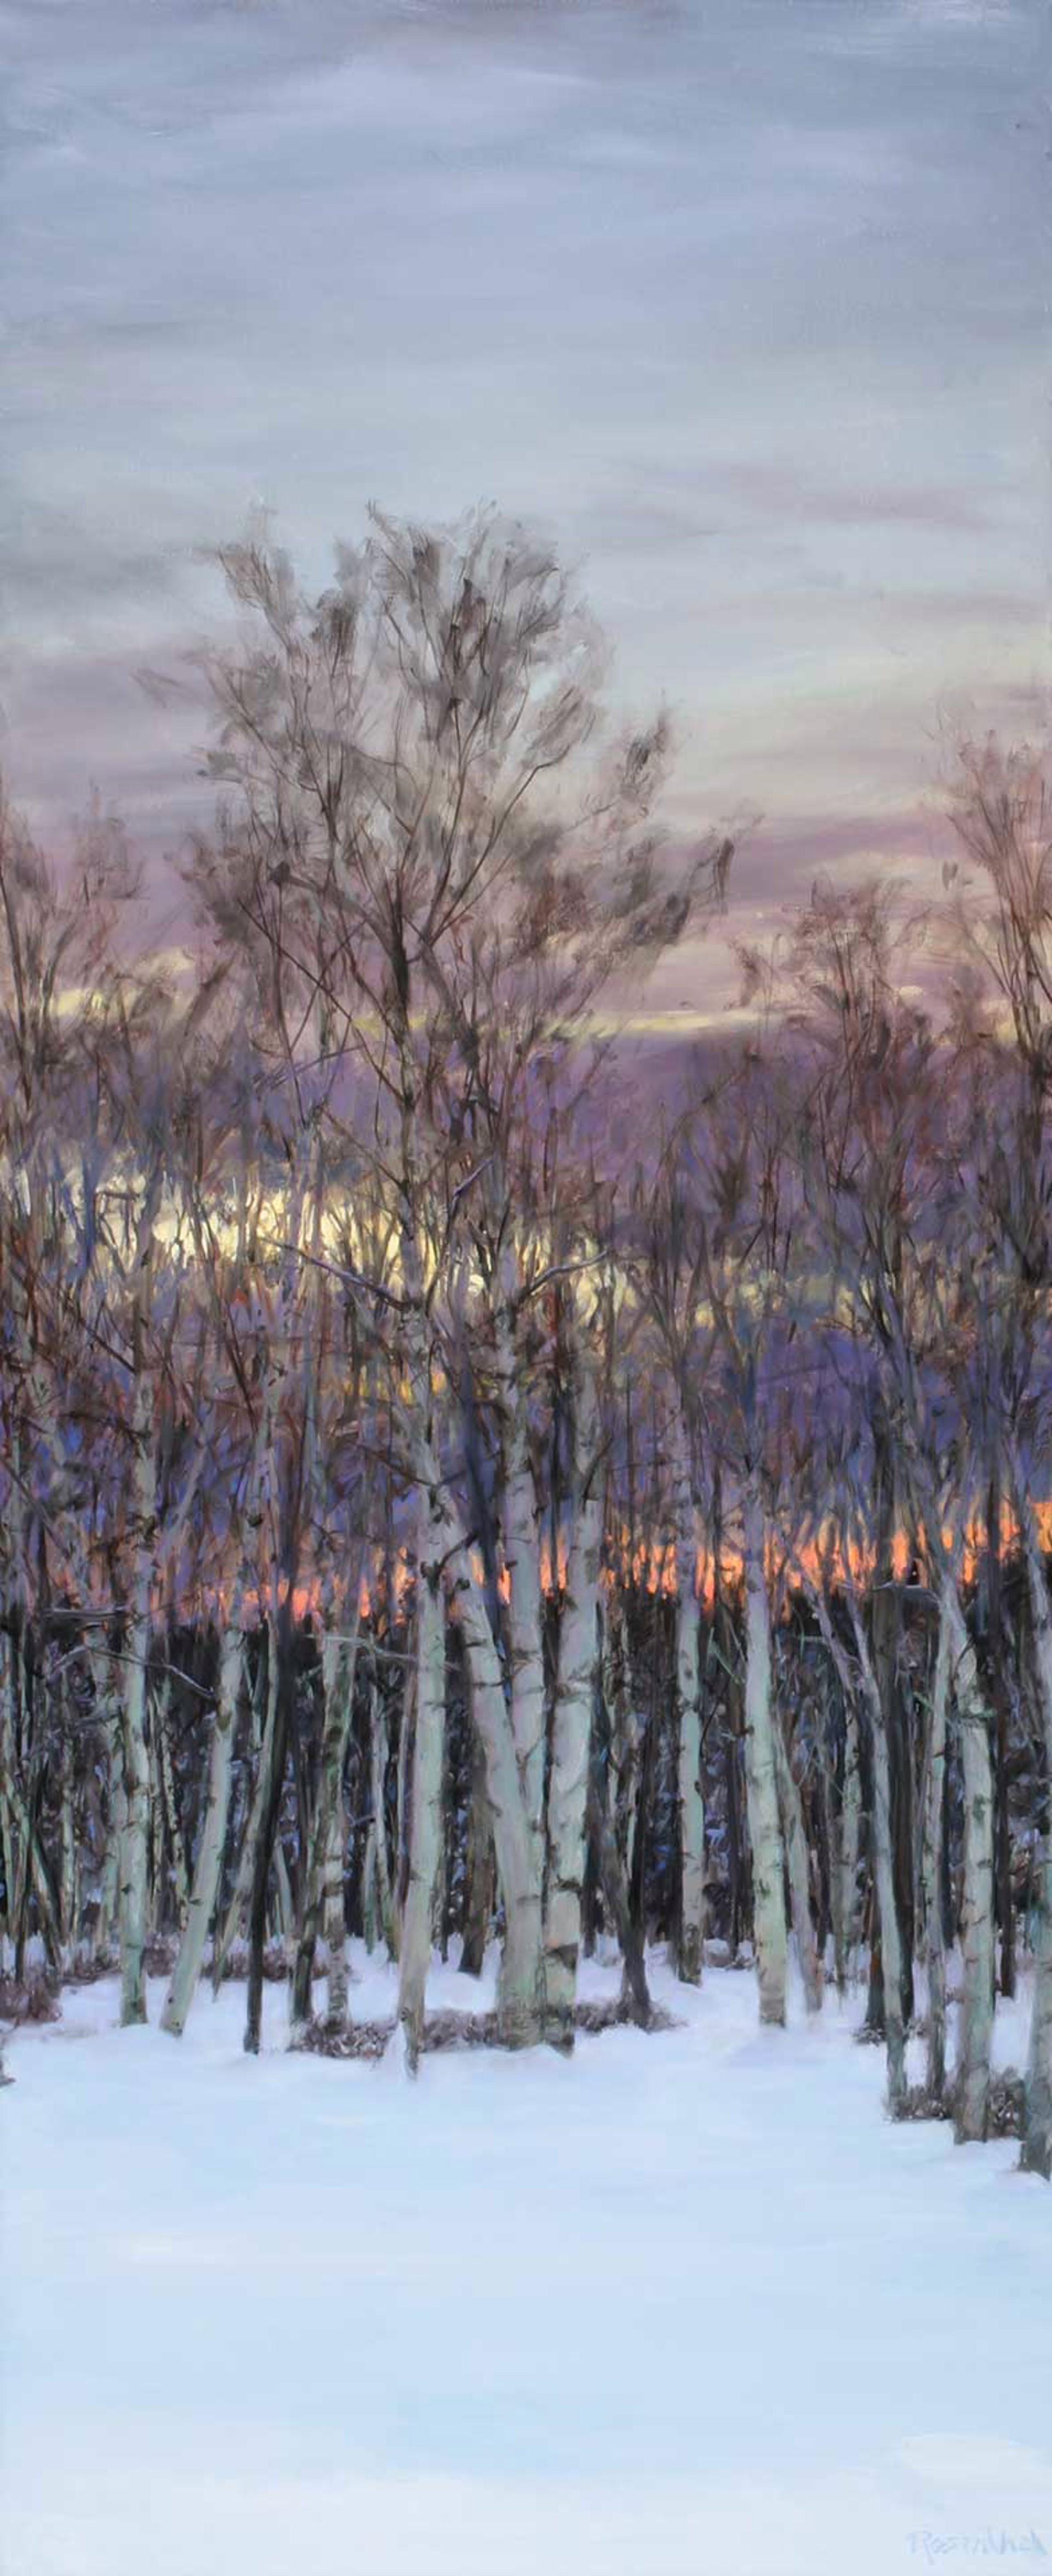 Sunset on the Birches by Sam Rosenthal